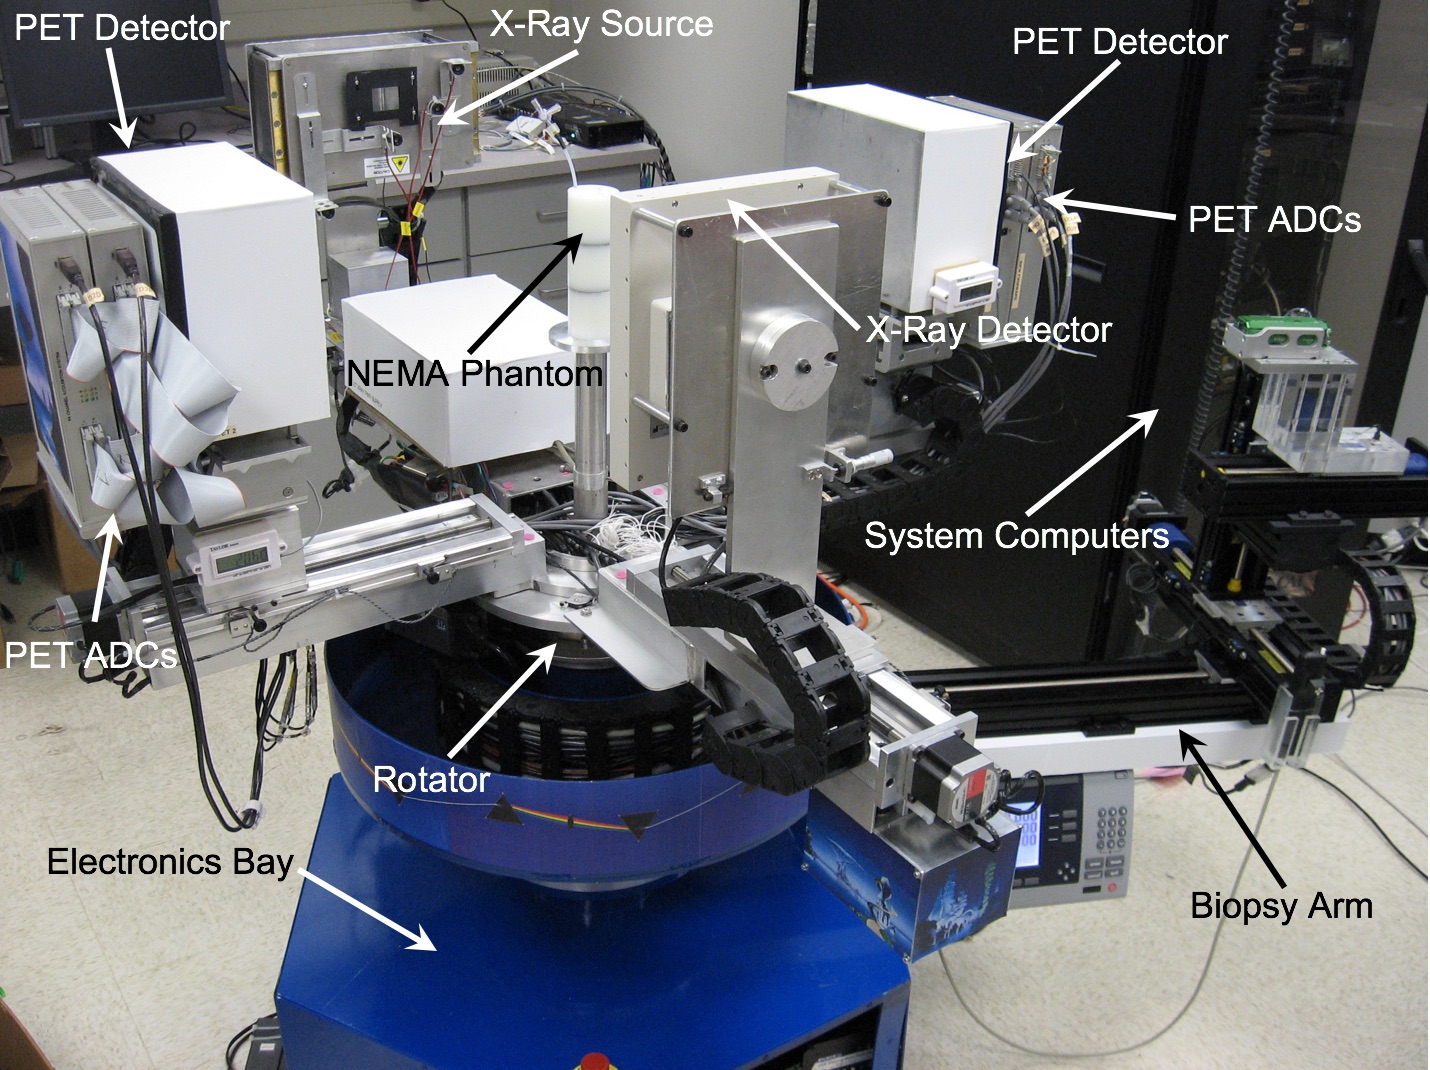 The image has several labeled parts which include PET Detector, X-ray source, Pet Detector, PET ADCs, NEMA Phantom, System Computers, Biopsy Arm, Rotator, and Electronics Bay.